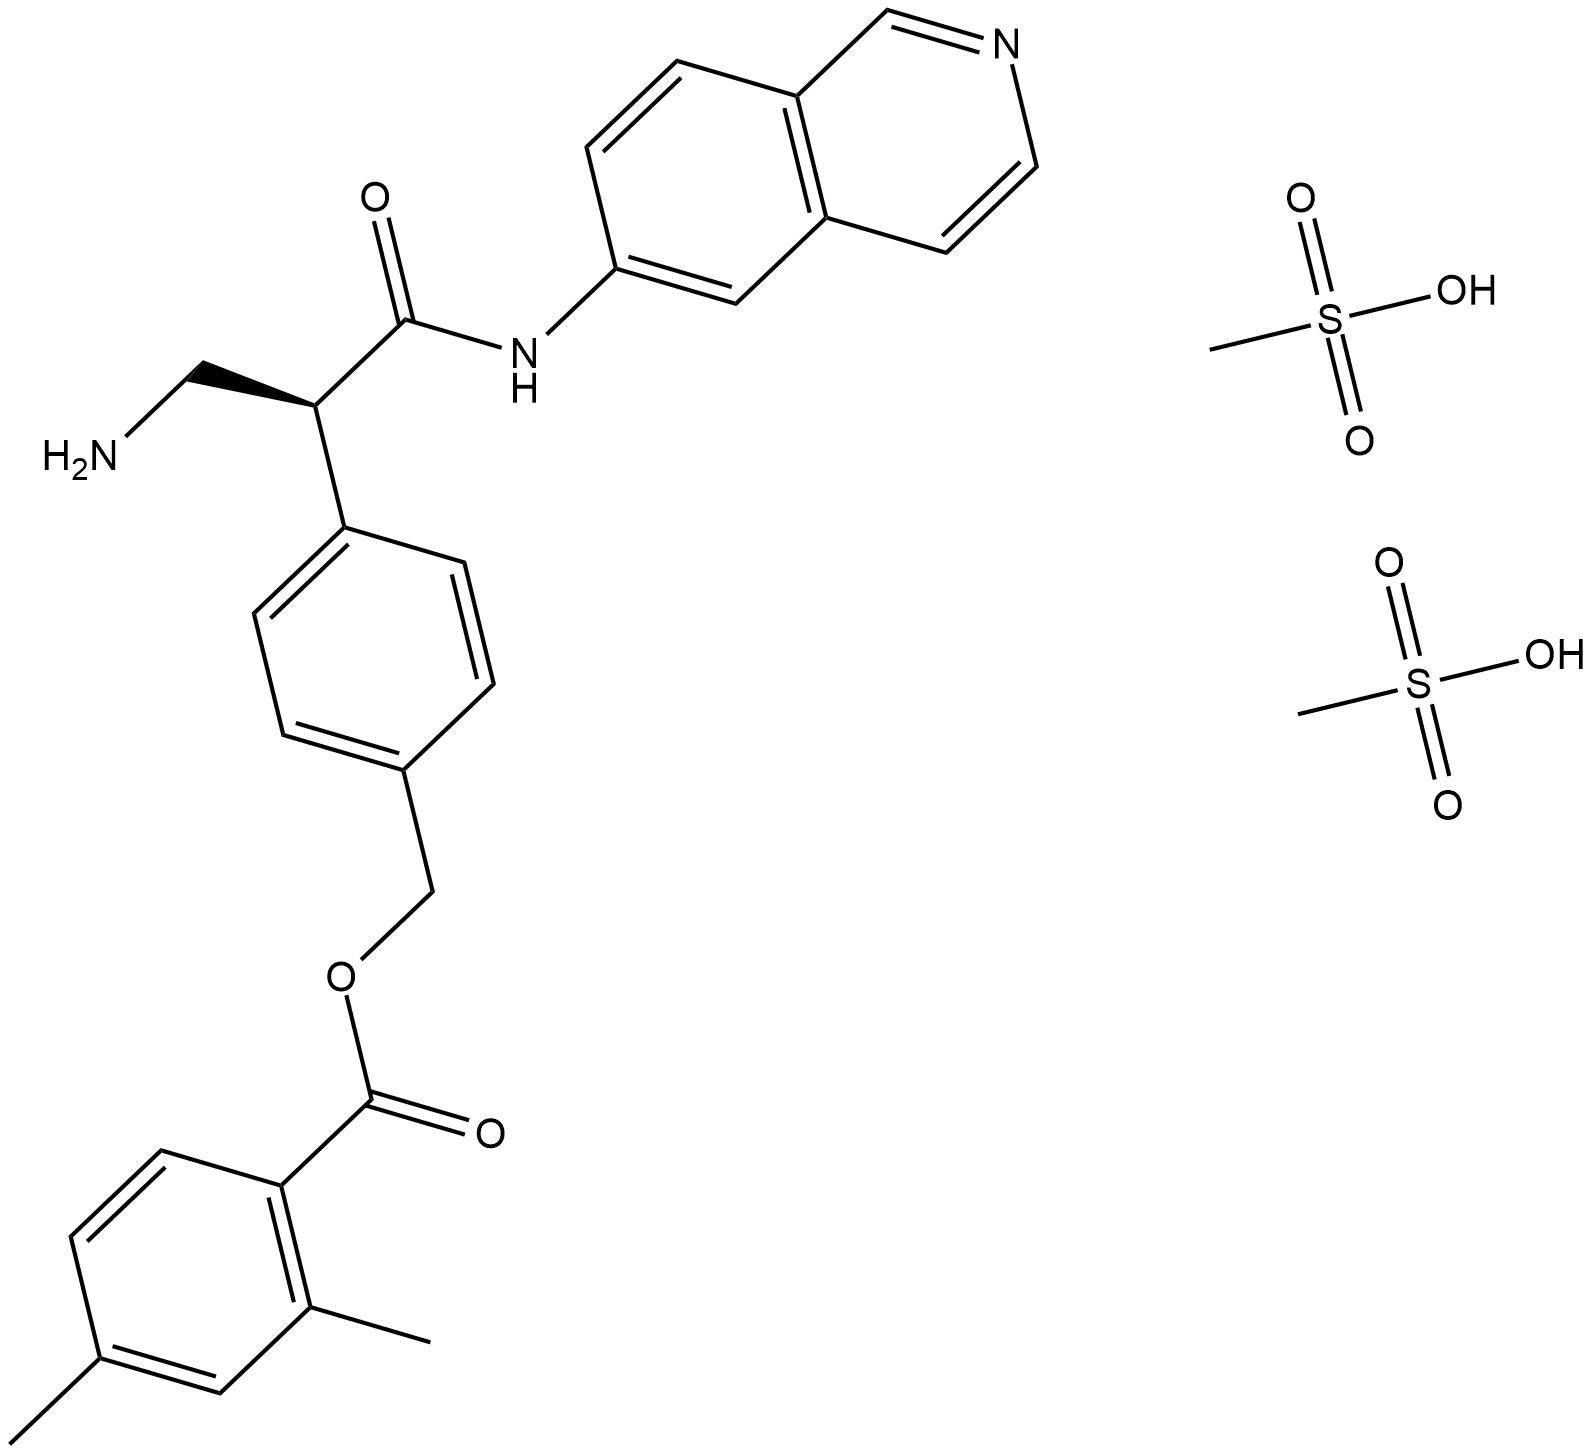 AR-13324 mesylate  Chemical Structure